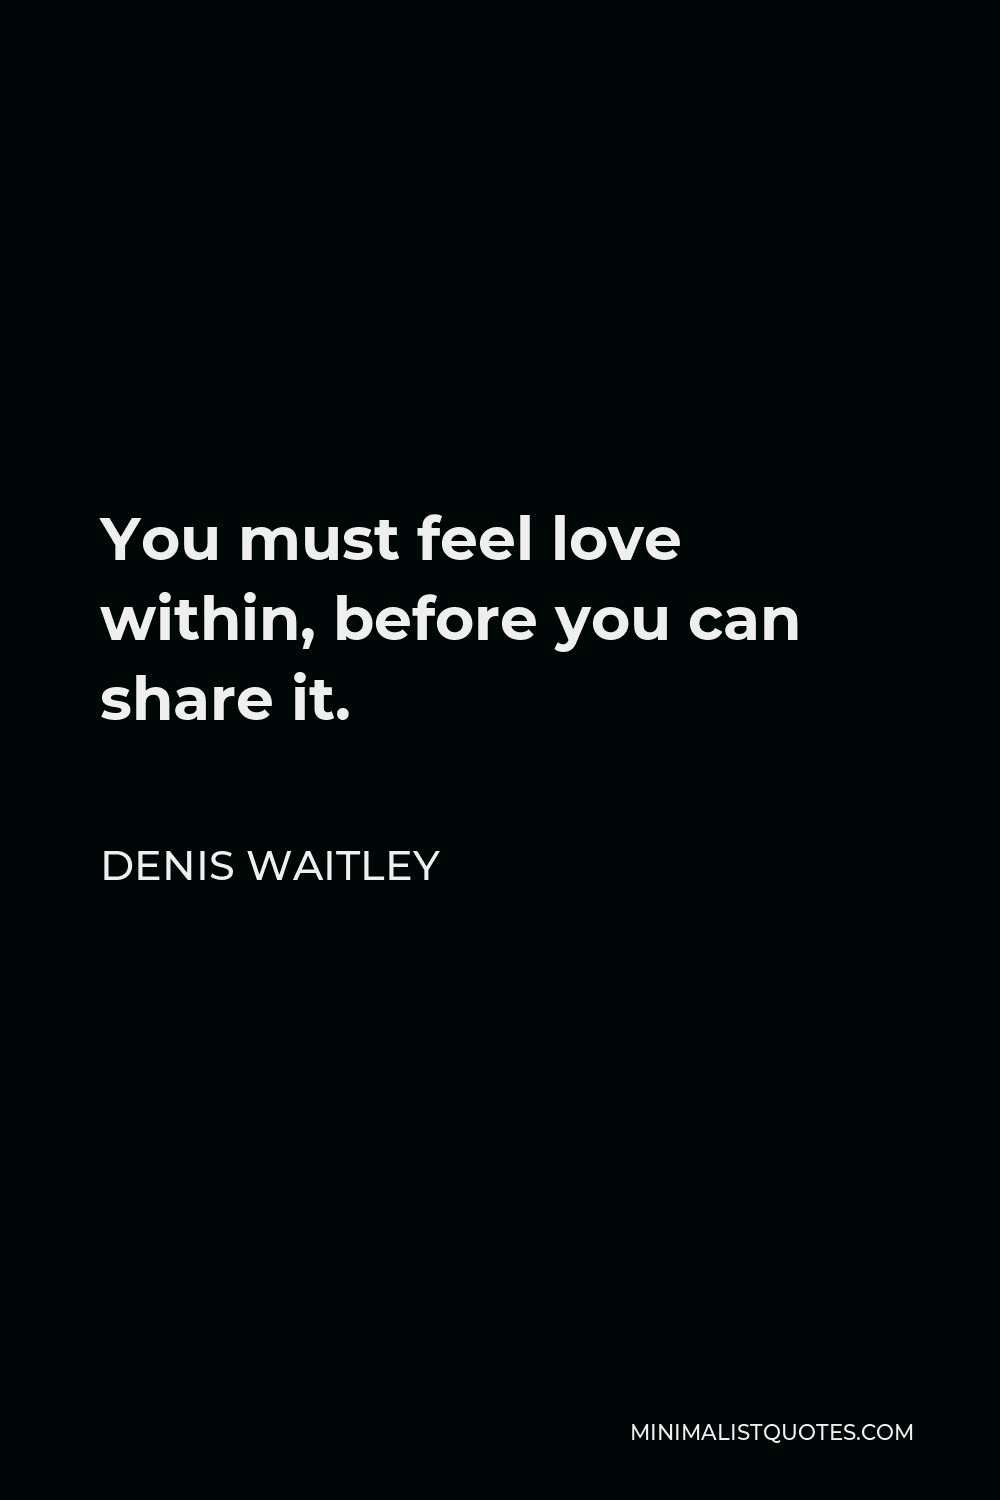 Denis Waitley Quote - You must feel love within, before you can share it.